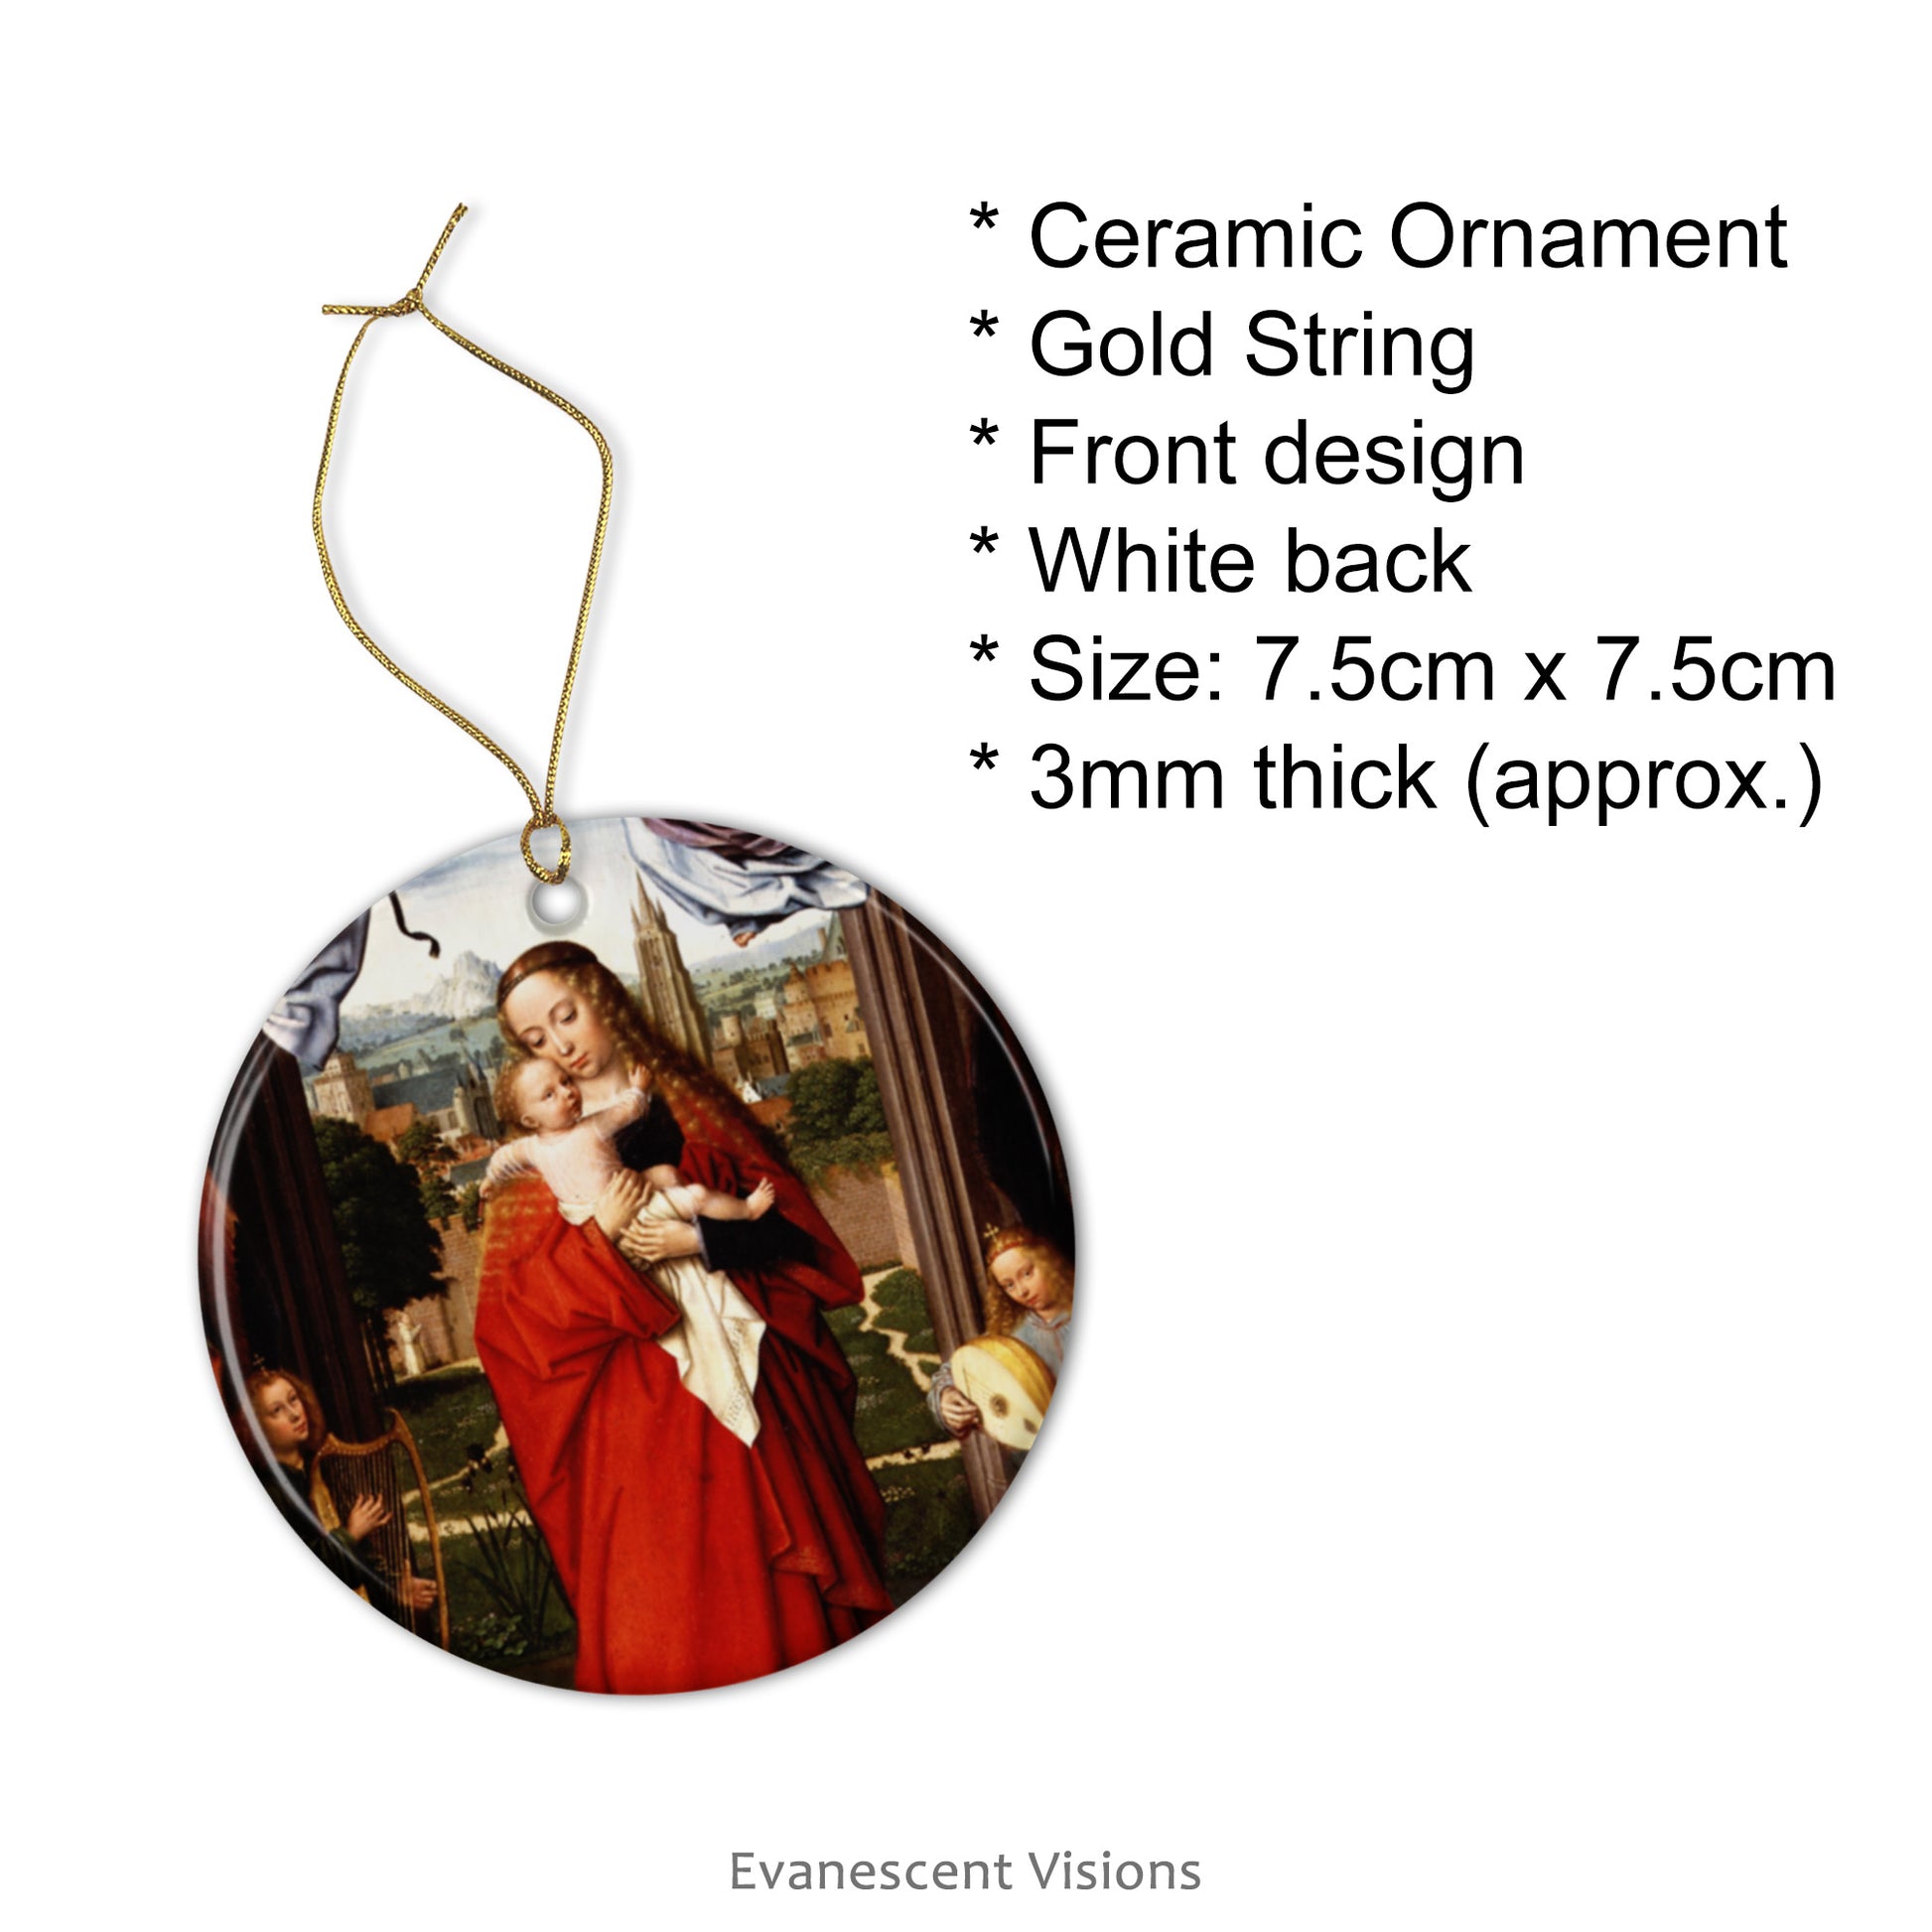 Product details for ceramic ornament with picture of ornament.